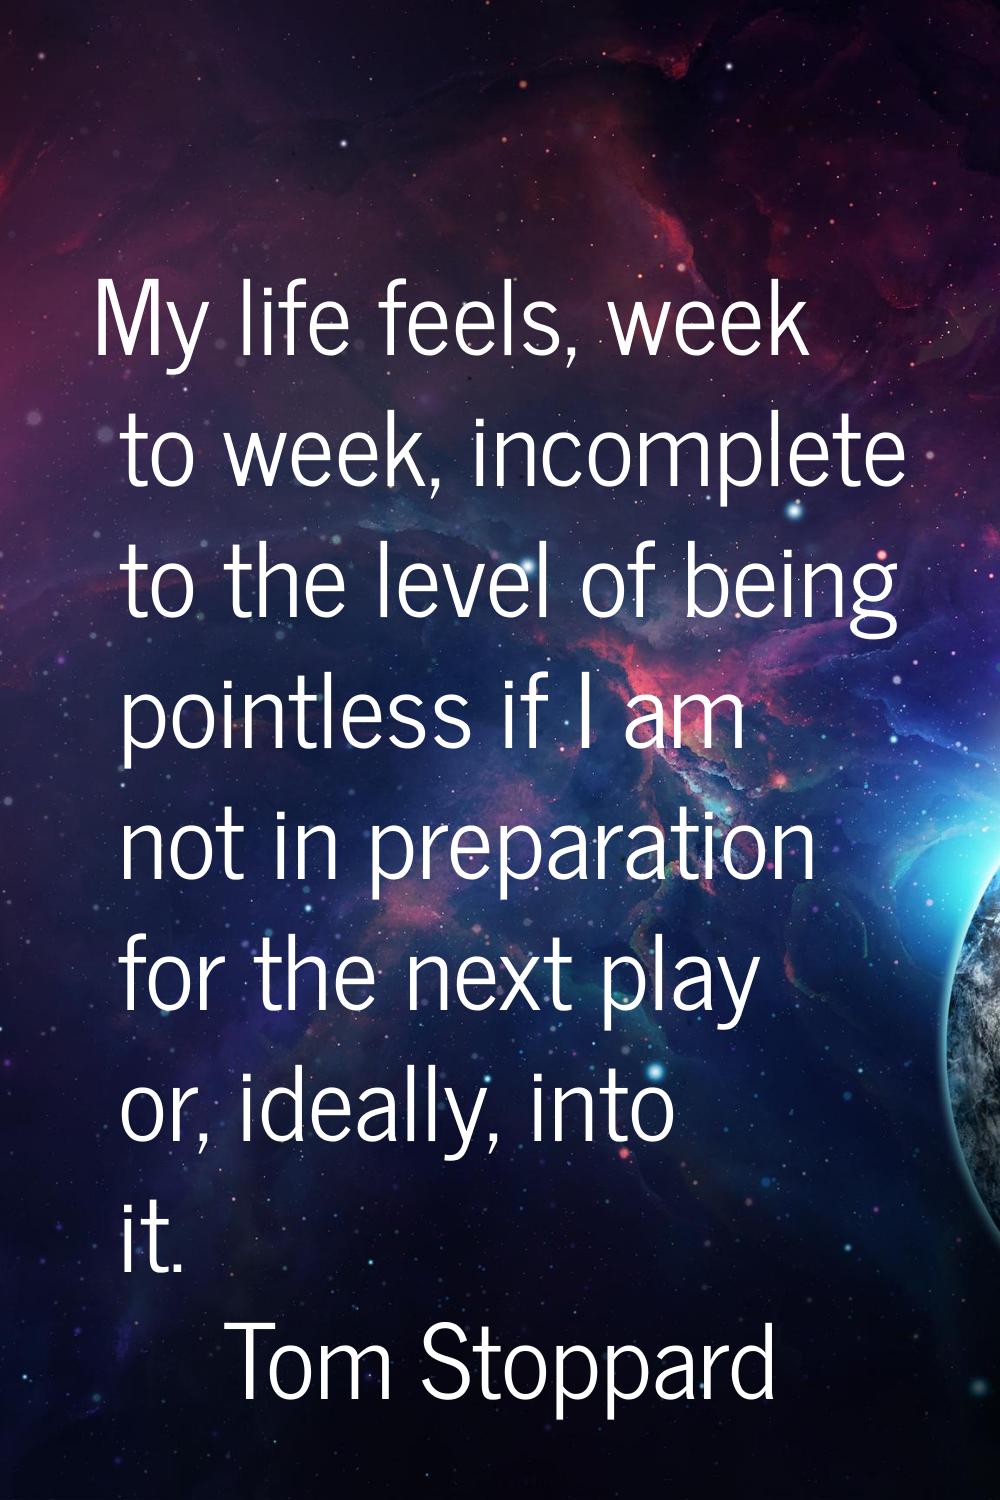 My life feels, week to week, incomplete to the level of being pointless if I am not in preparation 